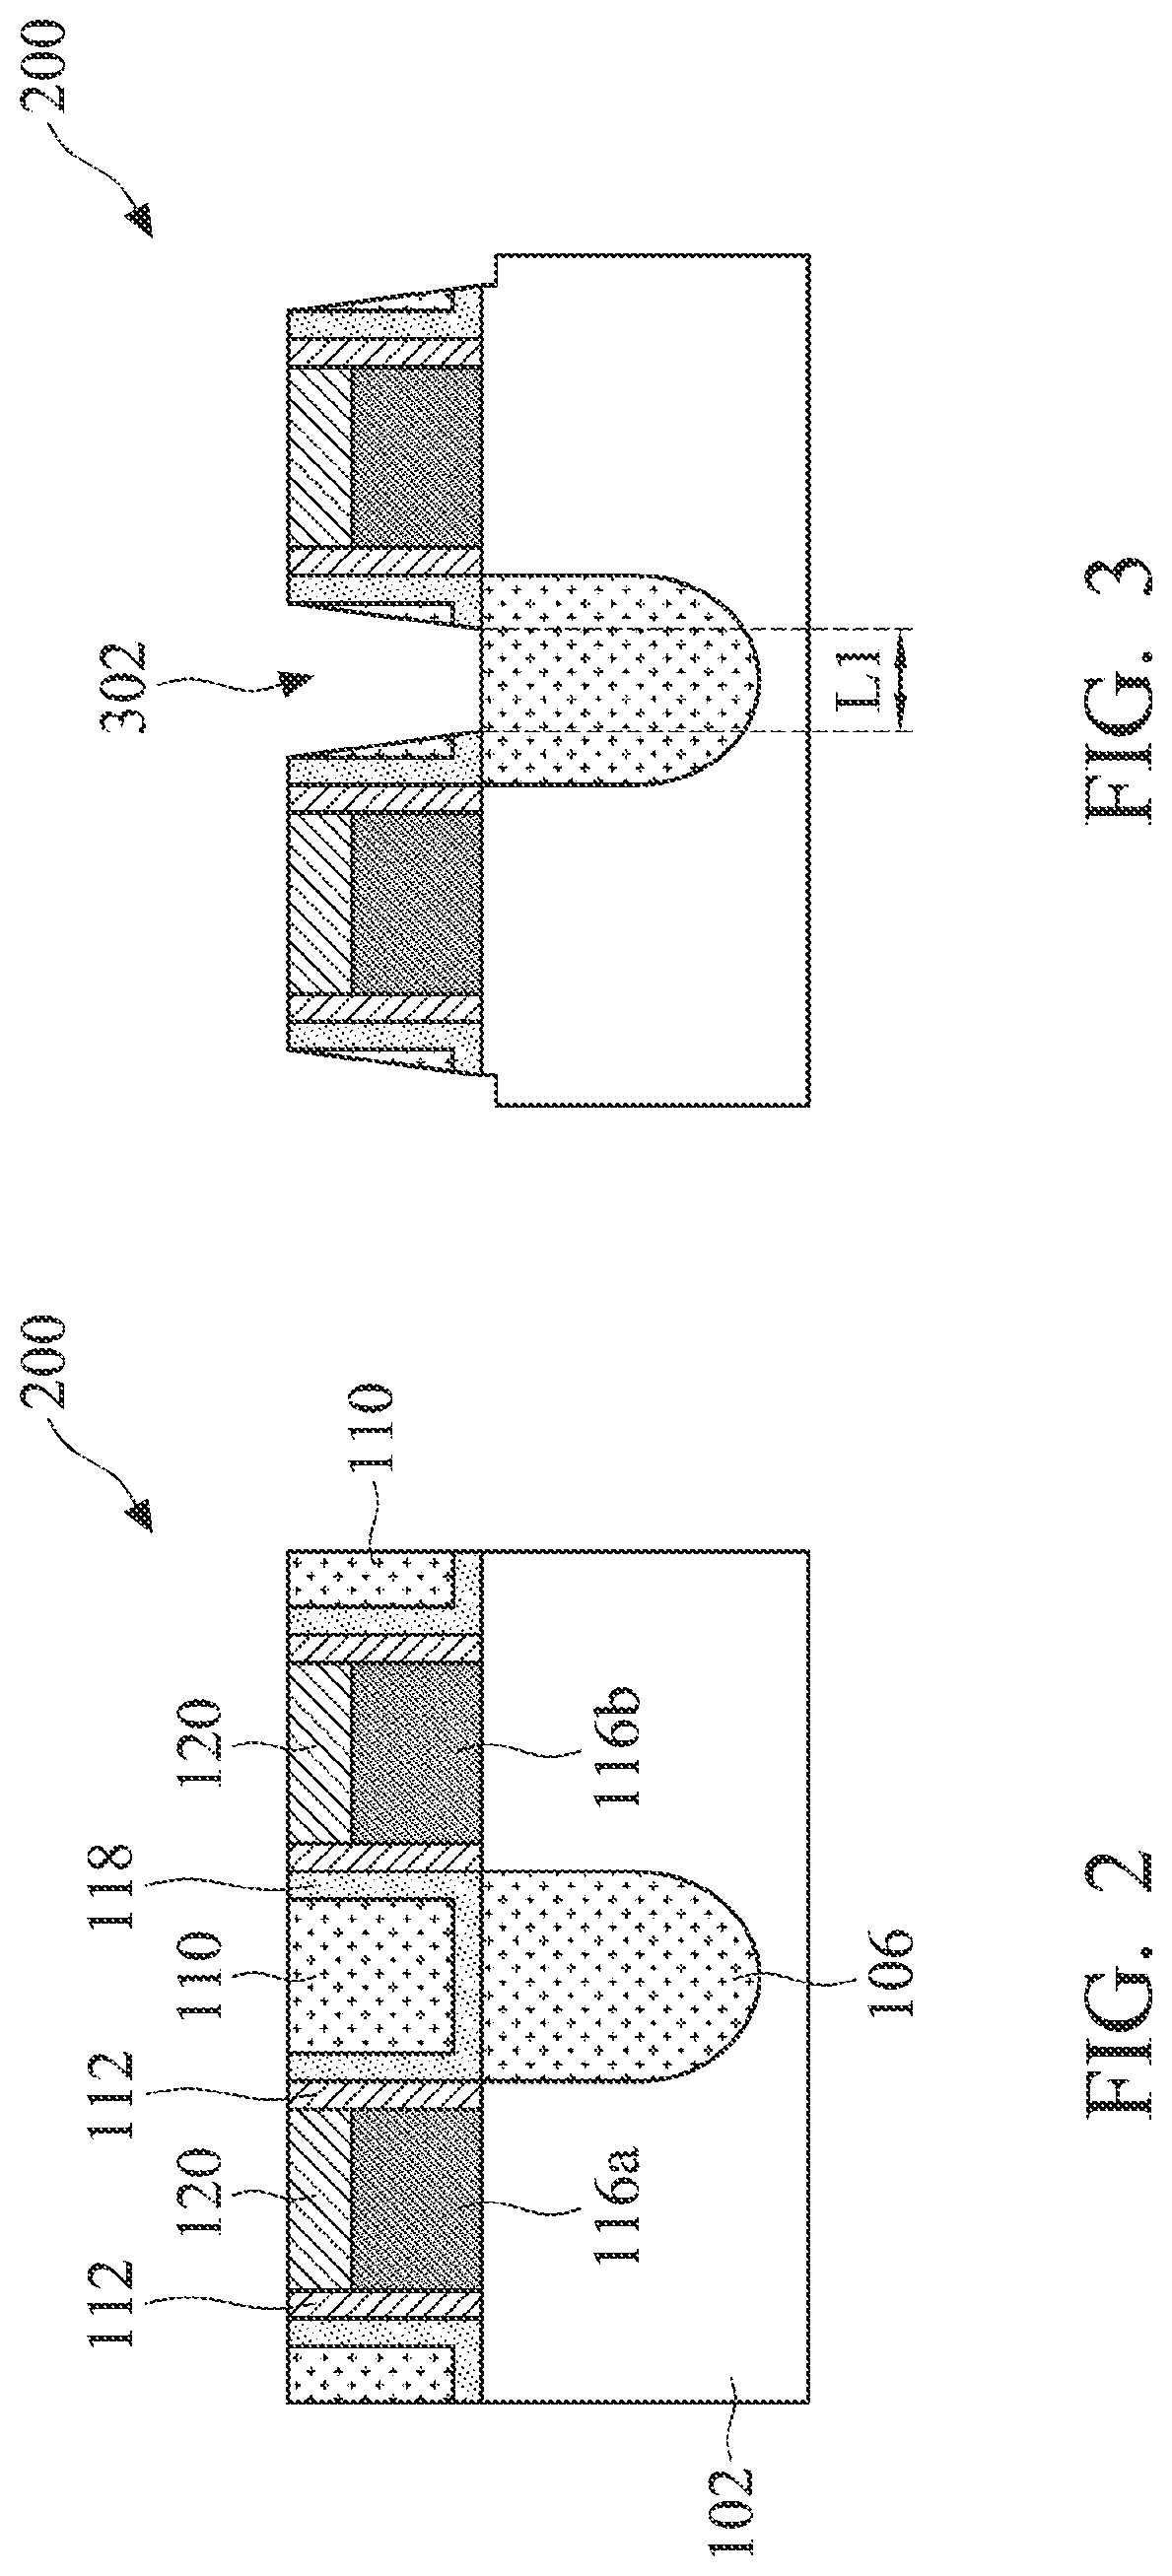 Contact air gap formation and structures thereof